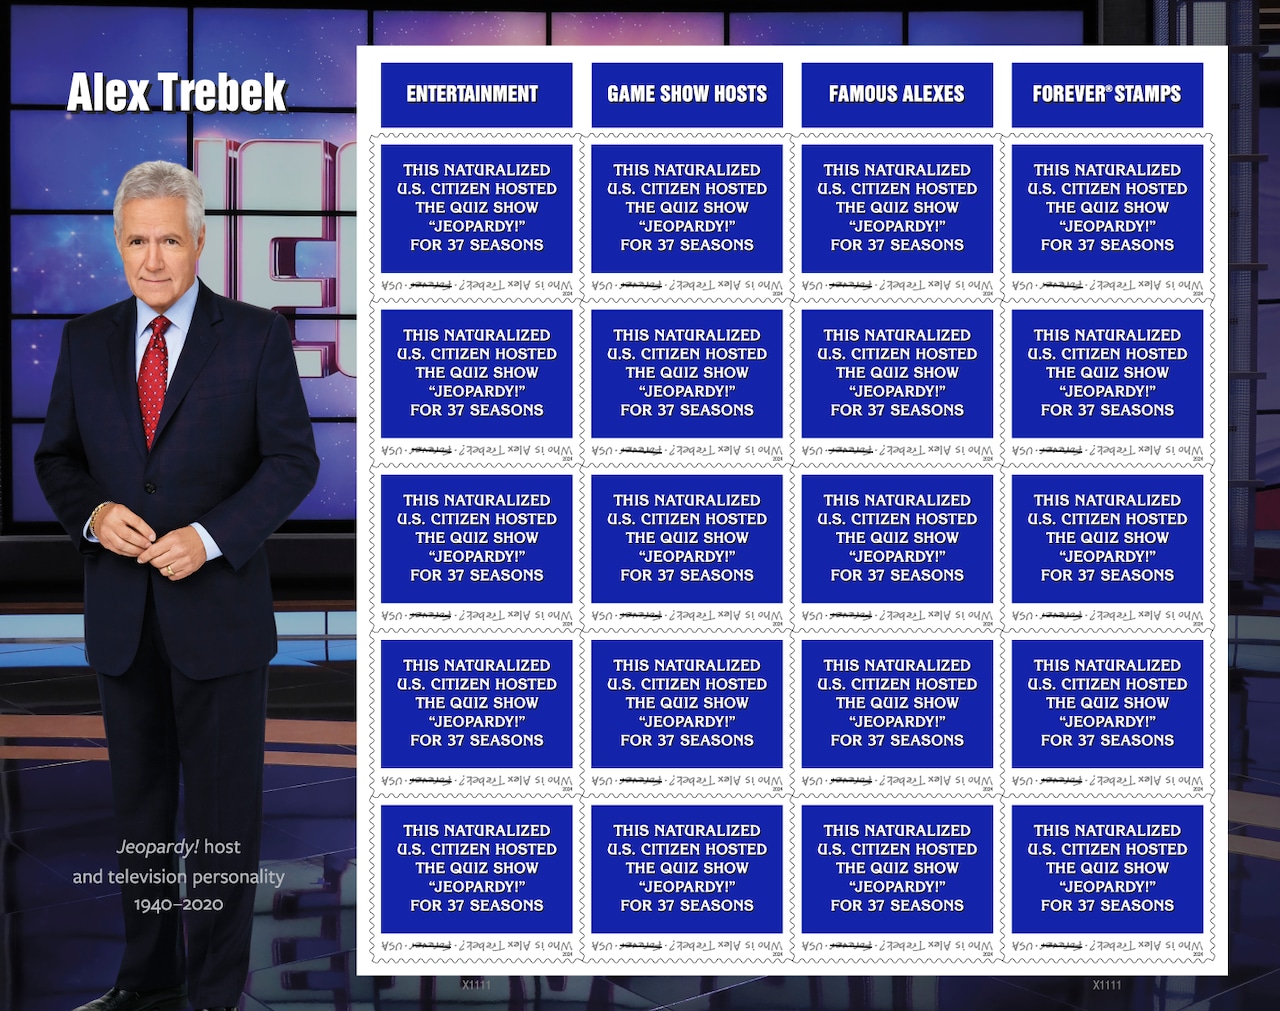 Former Jeopardy! host Alex Trebek honored with Forever stamp by USPS [Video]